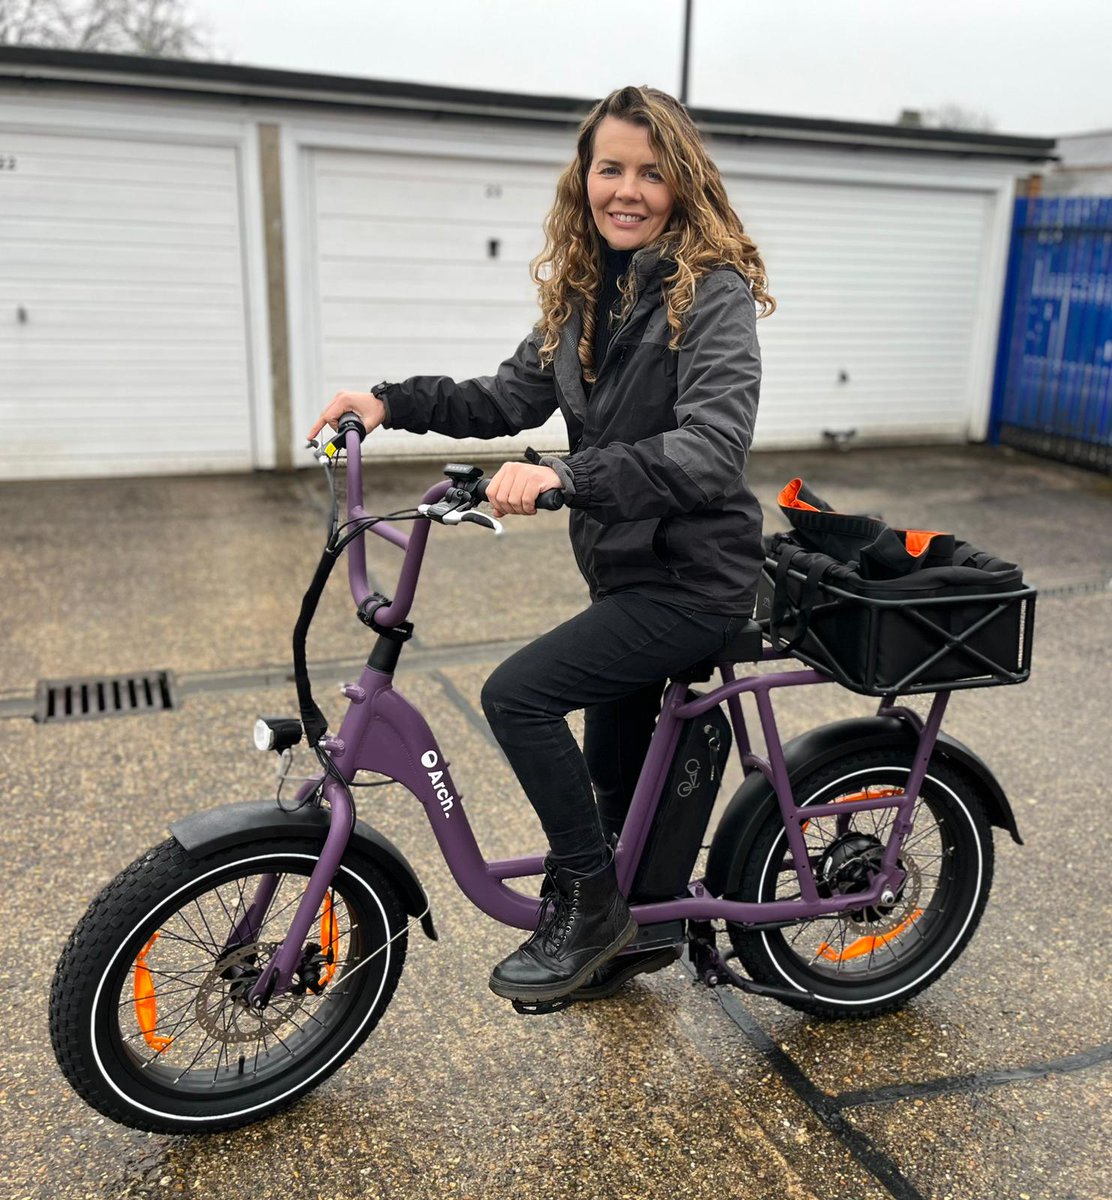 #HealthEquality benefits us all; we aim to make our specialist healthcare service accessible to anyone facing #homelessness in #Brighton. Our outreach team uses ebikes to get to hard to reach places around the city zurl.co/A95w #WHO75 #HealthForAll #WorldHealthDay @WHO